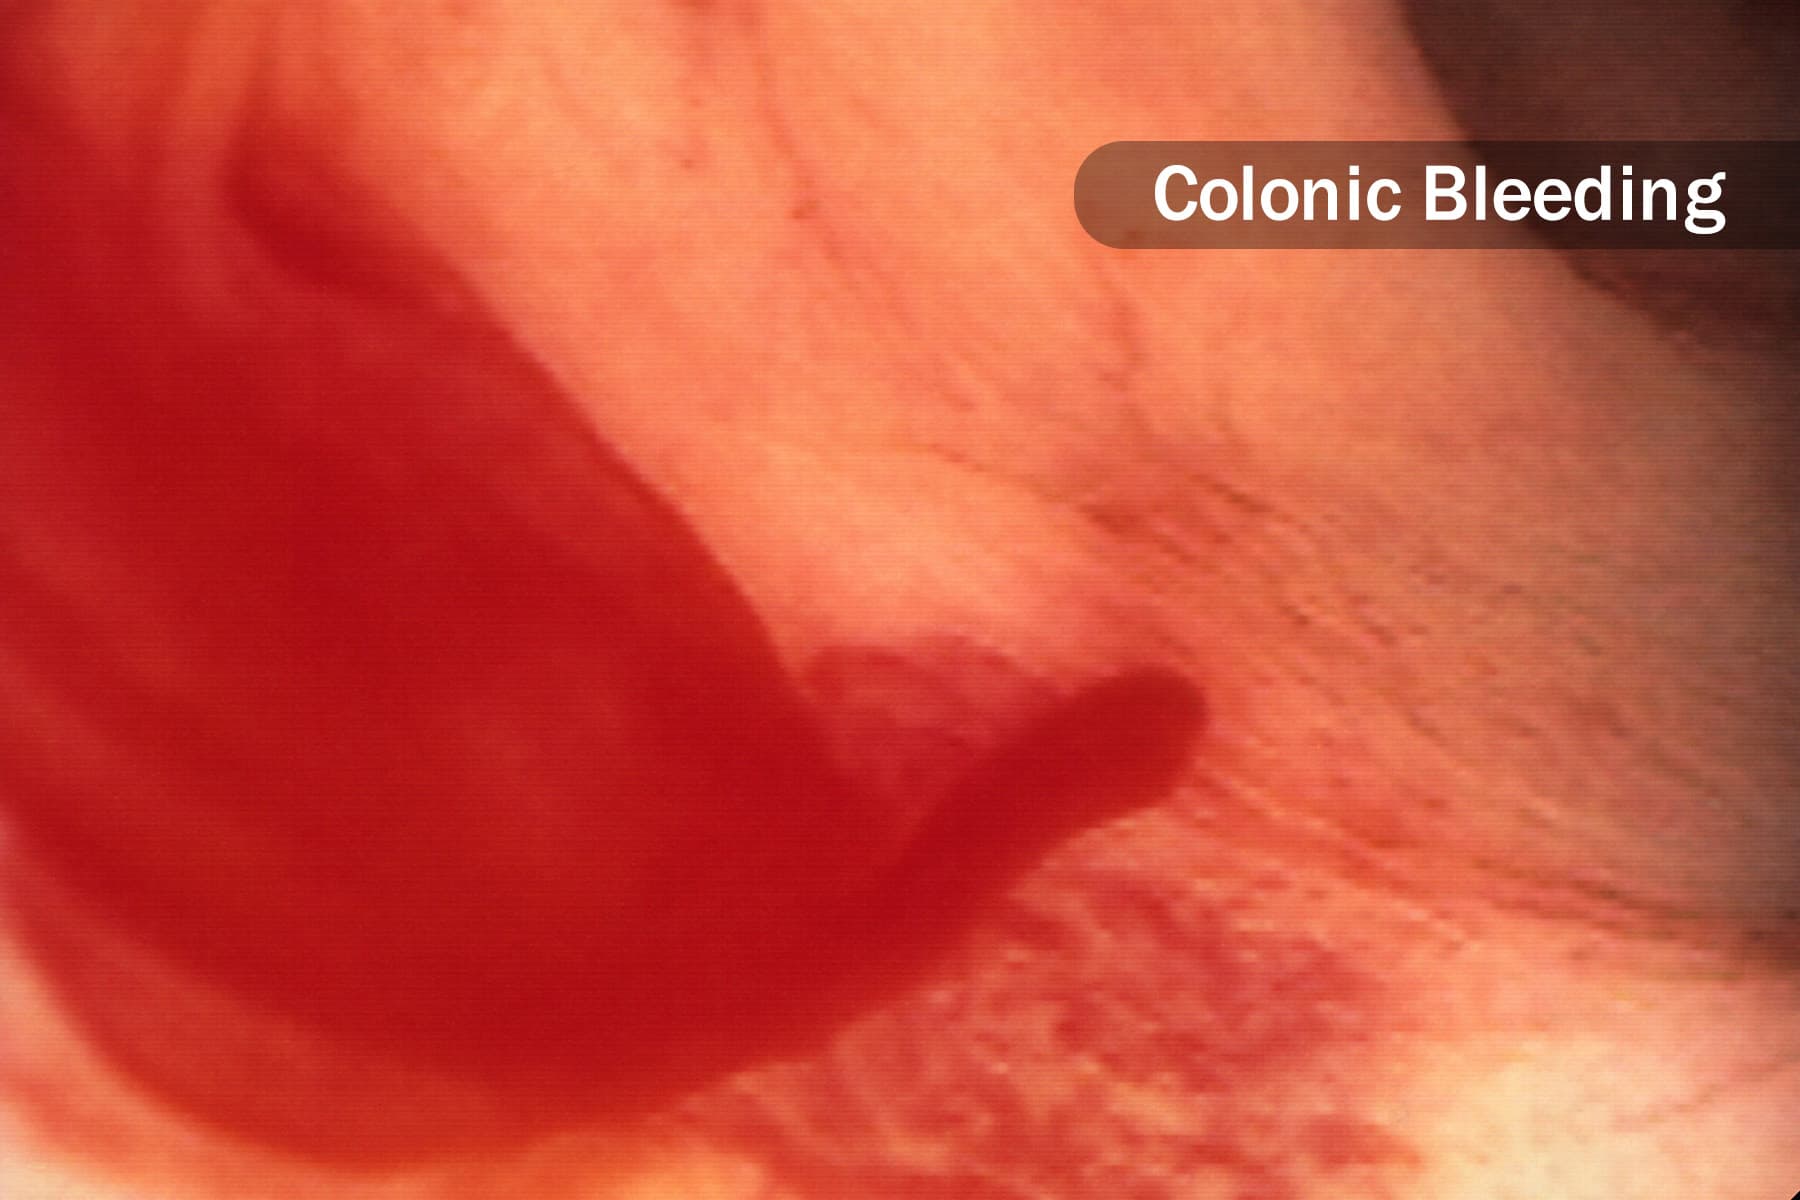 Colonoscopy: How to Prepare, How It Feels